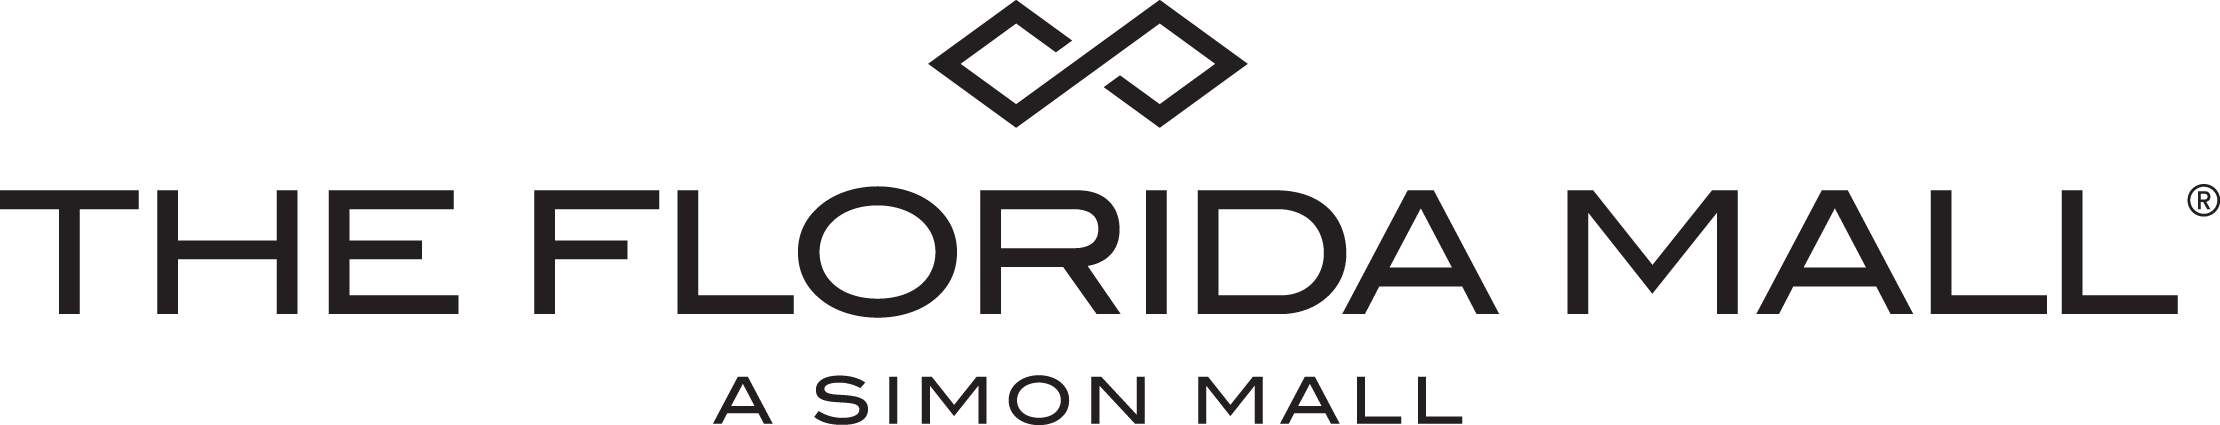 The Florida Mall logo in PNG format